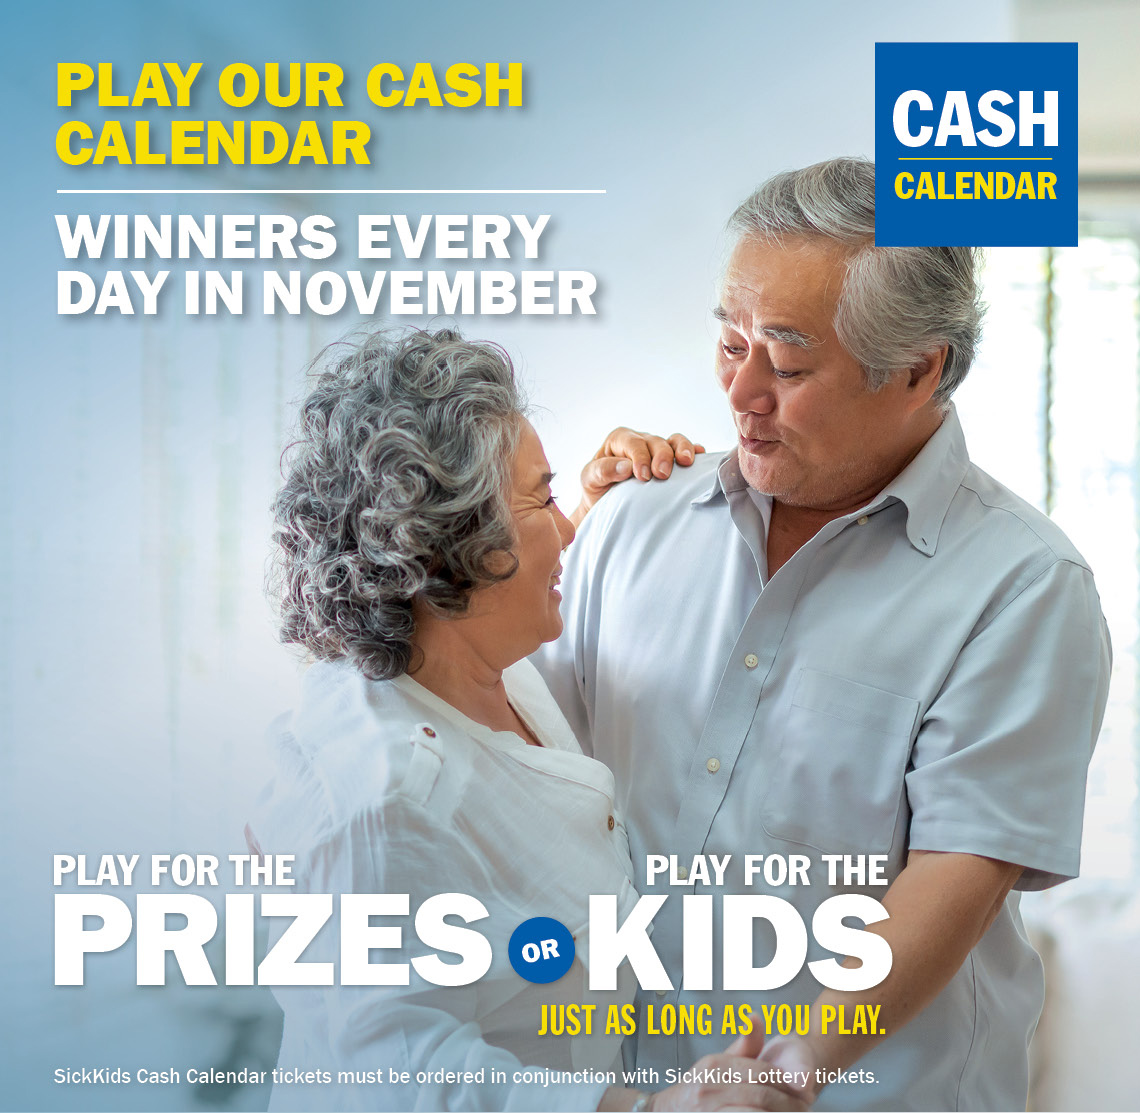 PLAY OUR CASH CALENDAR - WINNERS EVERY DAY IN OCTOBER